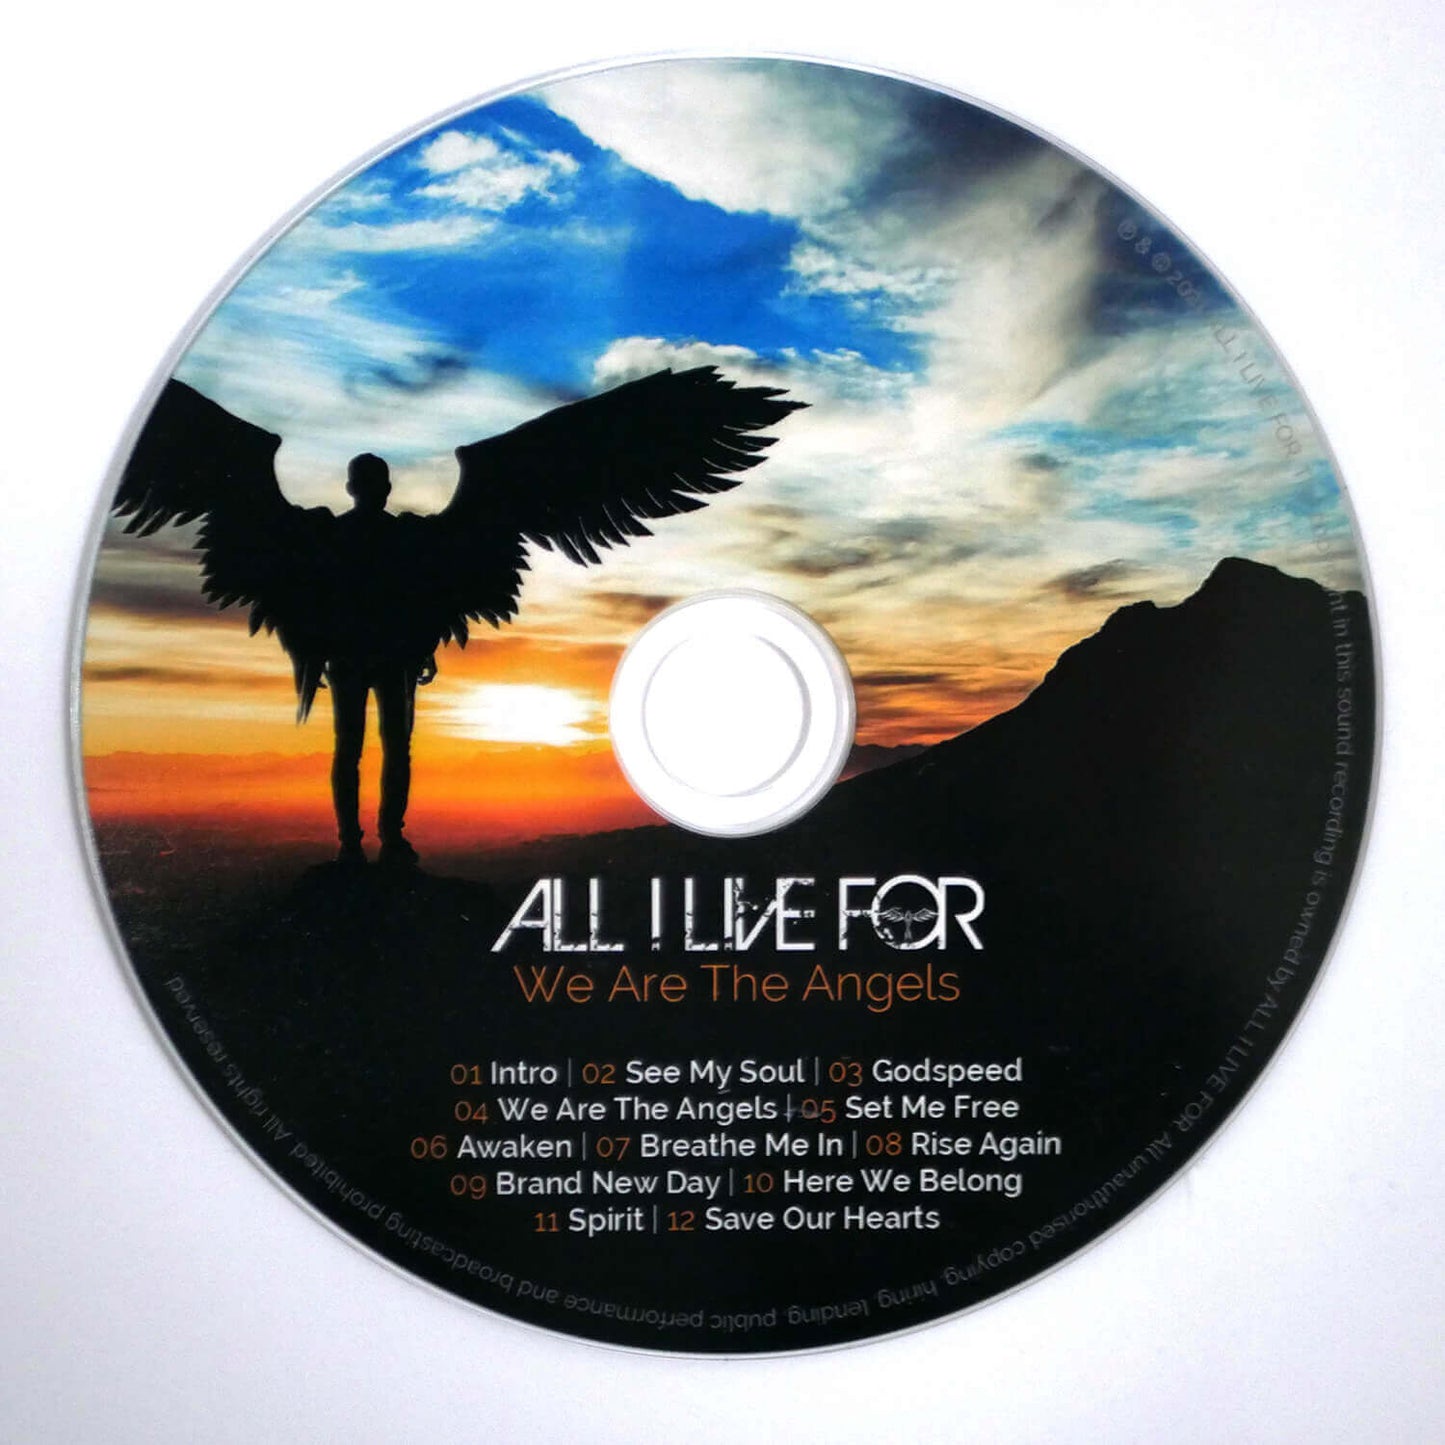 FREE 'We Are The Angels' Album CD (Signed) - Offer